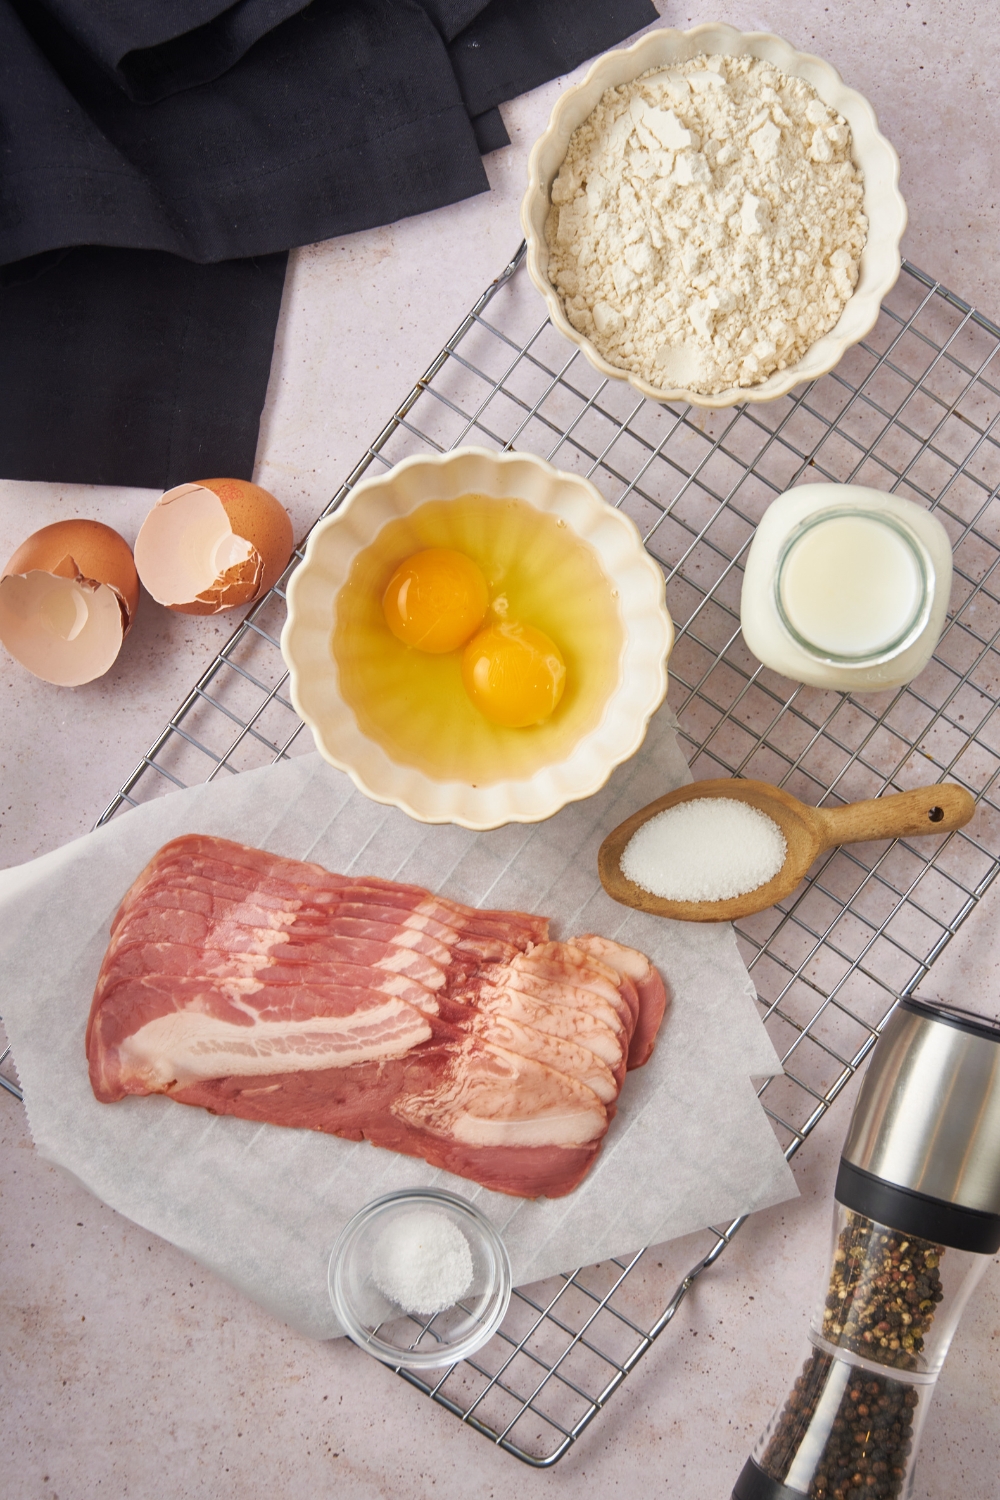 Overhead view of an assortment of ingredients including bowls of eggs, milk, flour, a pepper shaker, a spoonful of sugar, and a package of raw bacon over top of a piece of wax paper.